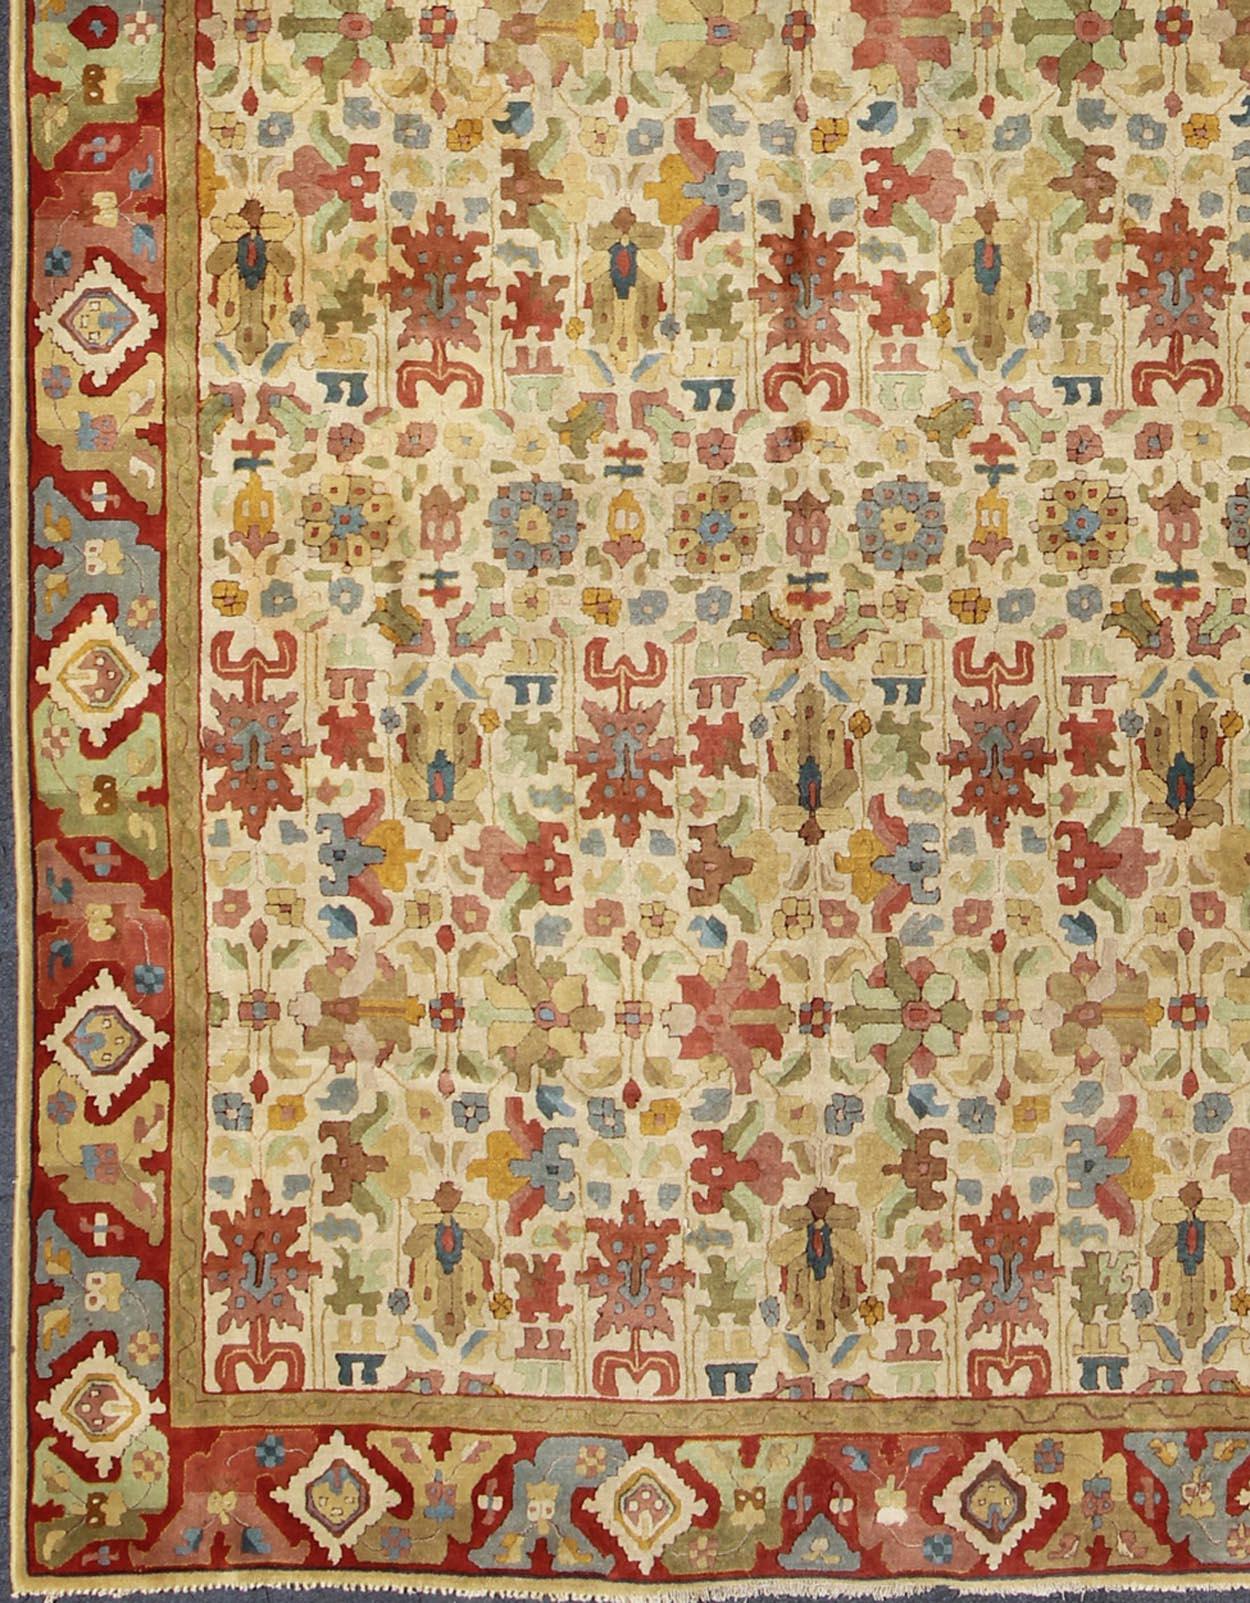 This German Bauhaus rug features a delightful array of colors woven together in a dazzling display of Sub-geometric designs. Every shade and hue of the primary and secondary colors rests beautifully upon the central, neutral field of ivory.